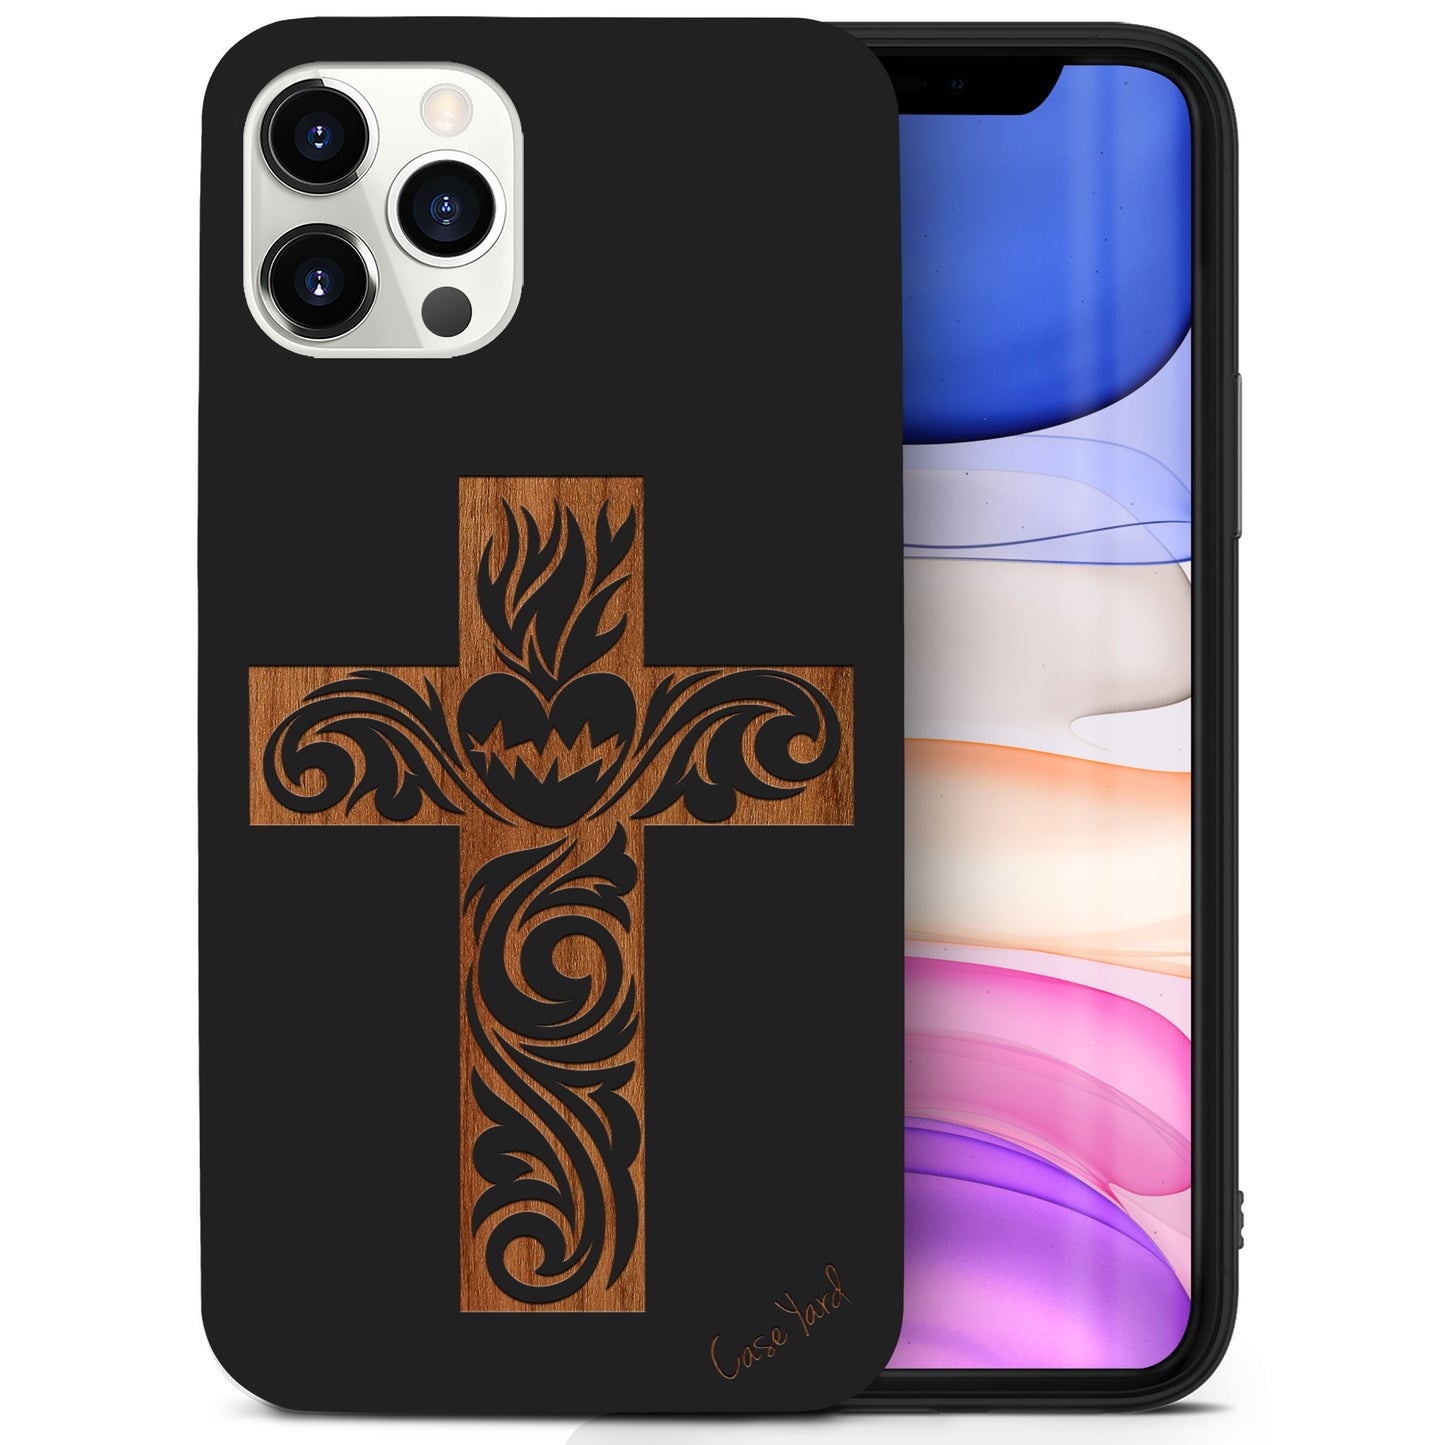 Wooden Cell Phone Case Cover, Laser Engraved case for iPhone & Samsung phone Cross 2 Case Design